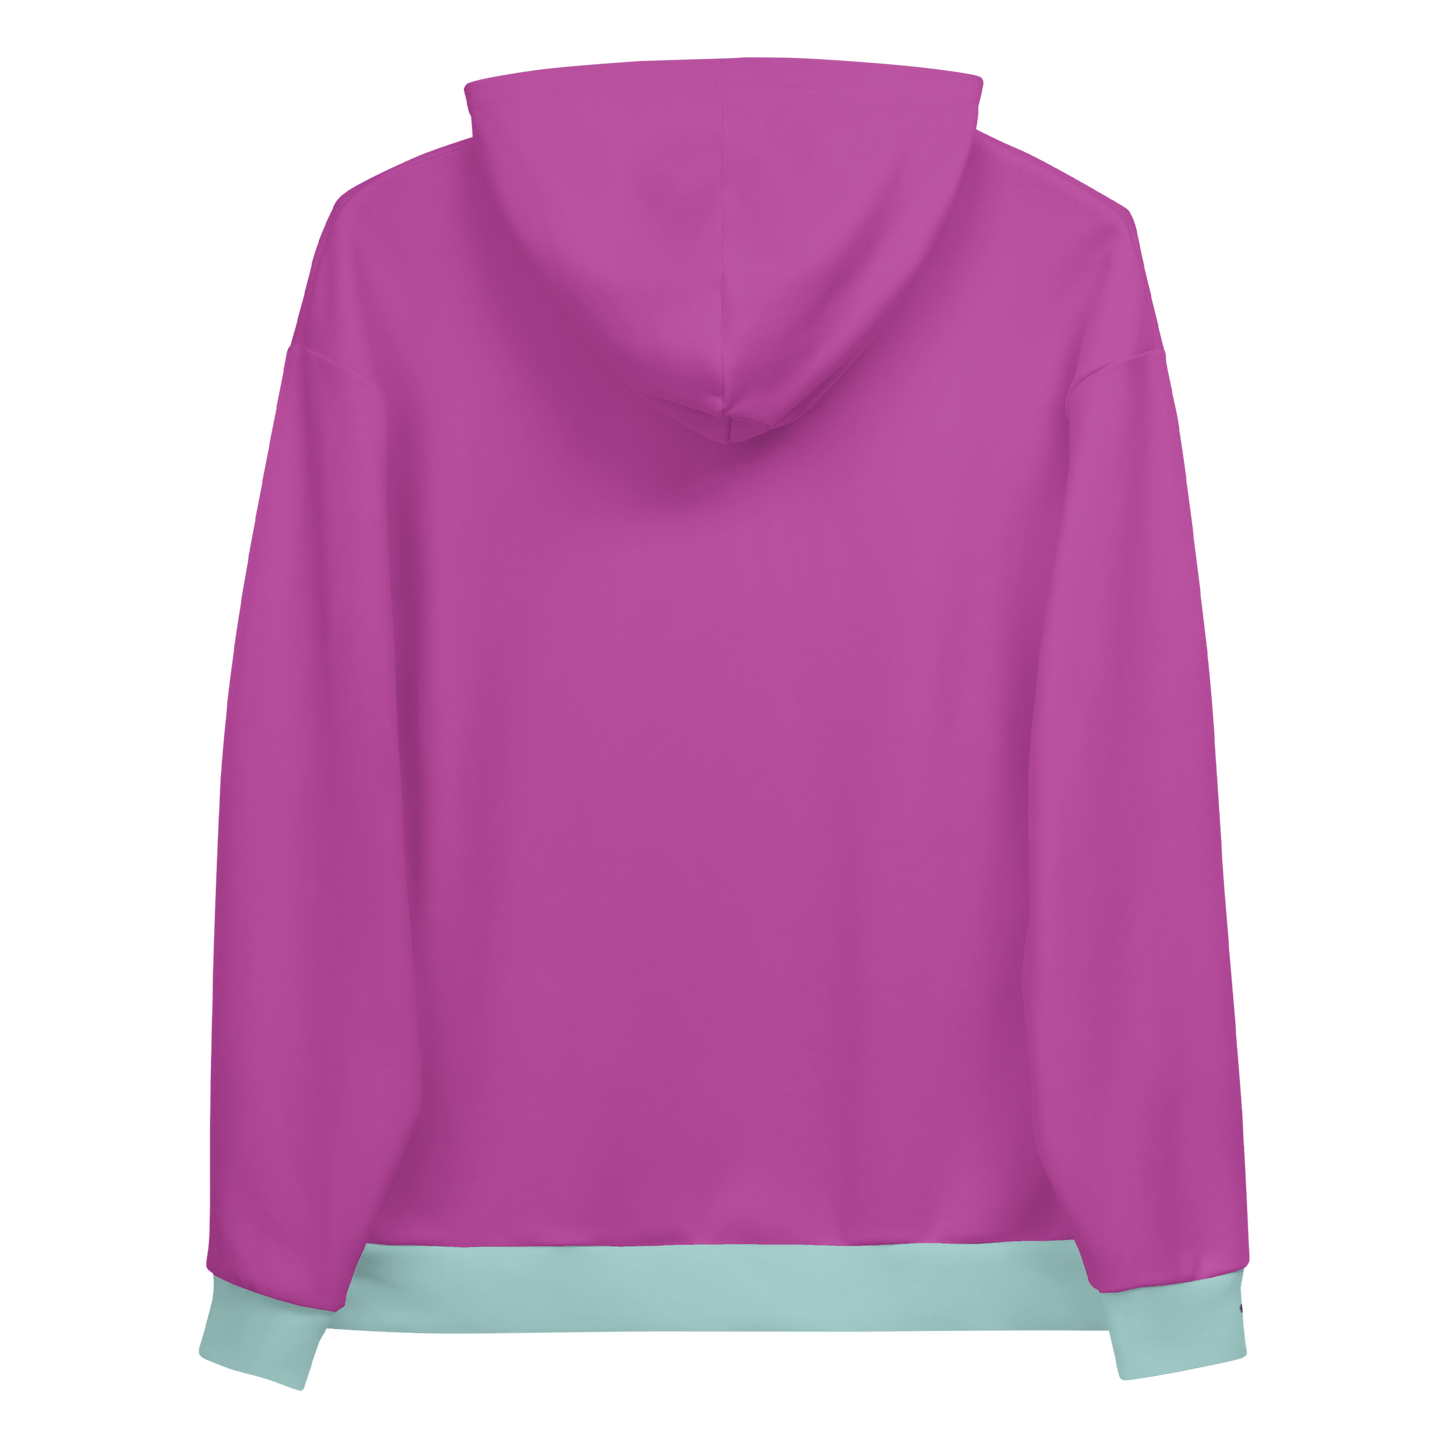 Cozy Fucsia Pink Hoodie | Gender-Inclusive Apparel from CRiZ AMOR